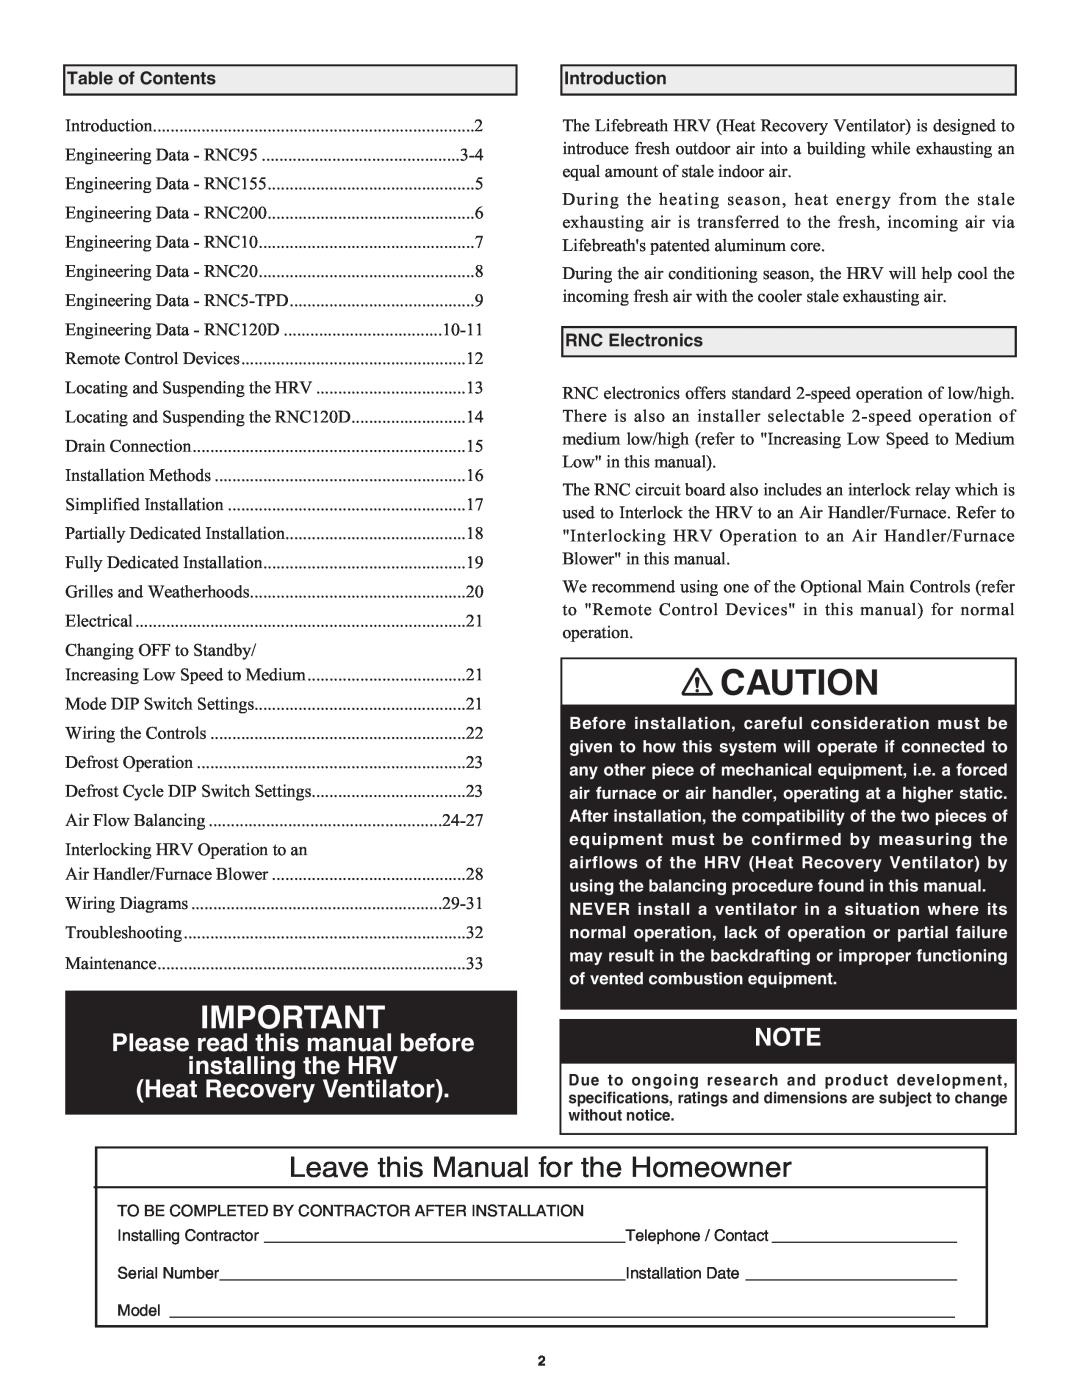 Lifebreath RNC10 Leave this Manual for the Homeowner, Please read this manual before installing the HRV, Table of Contents 